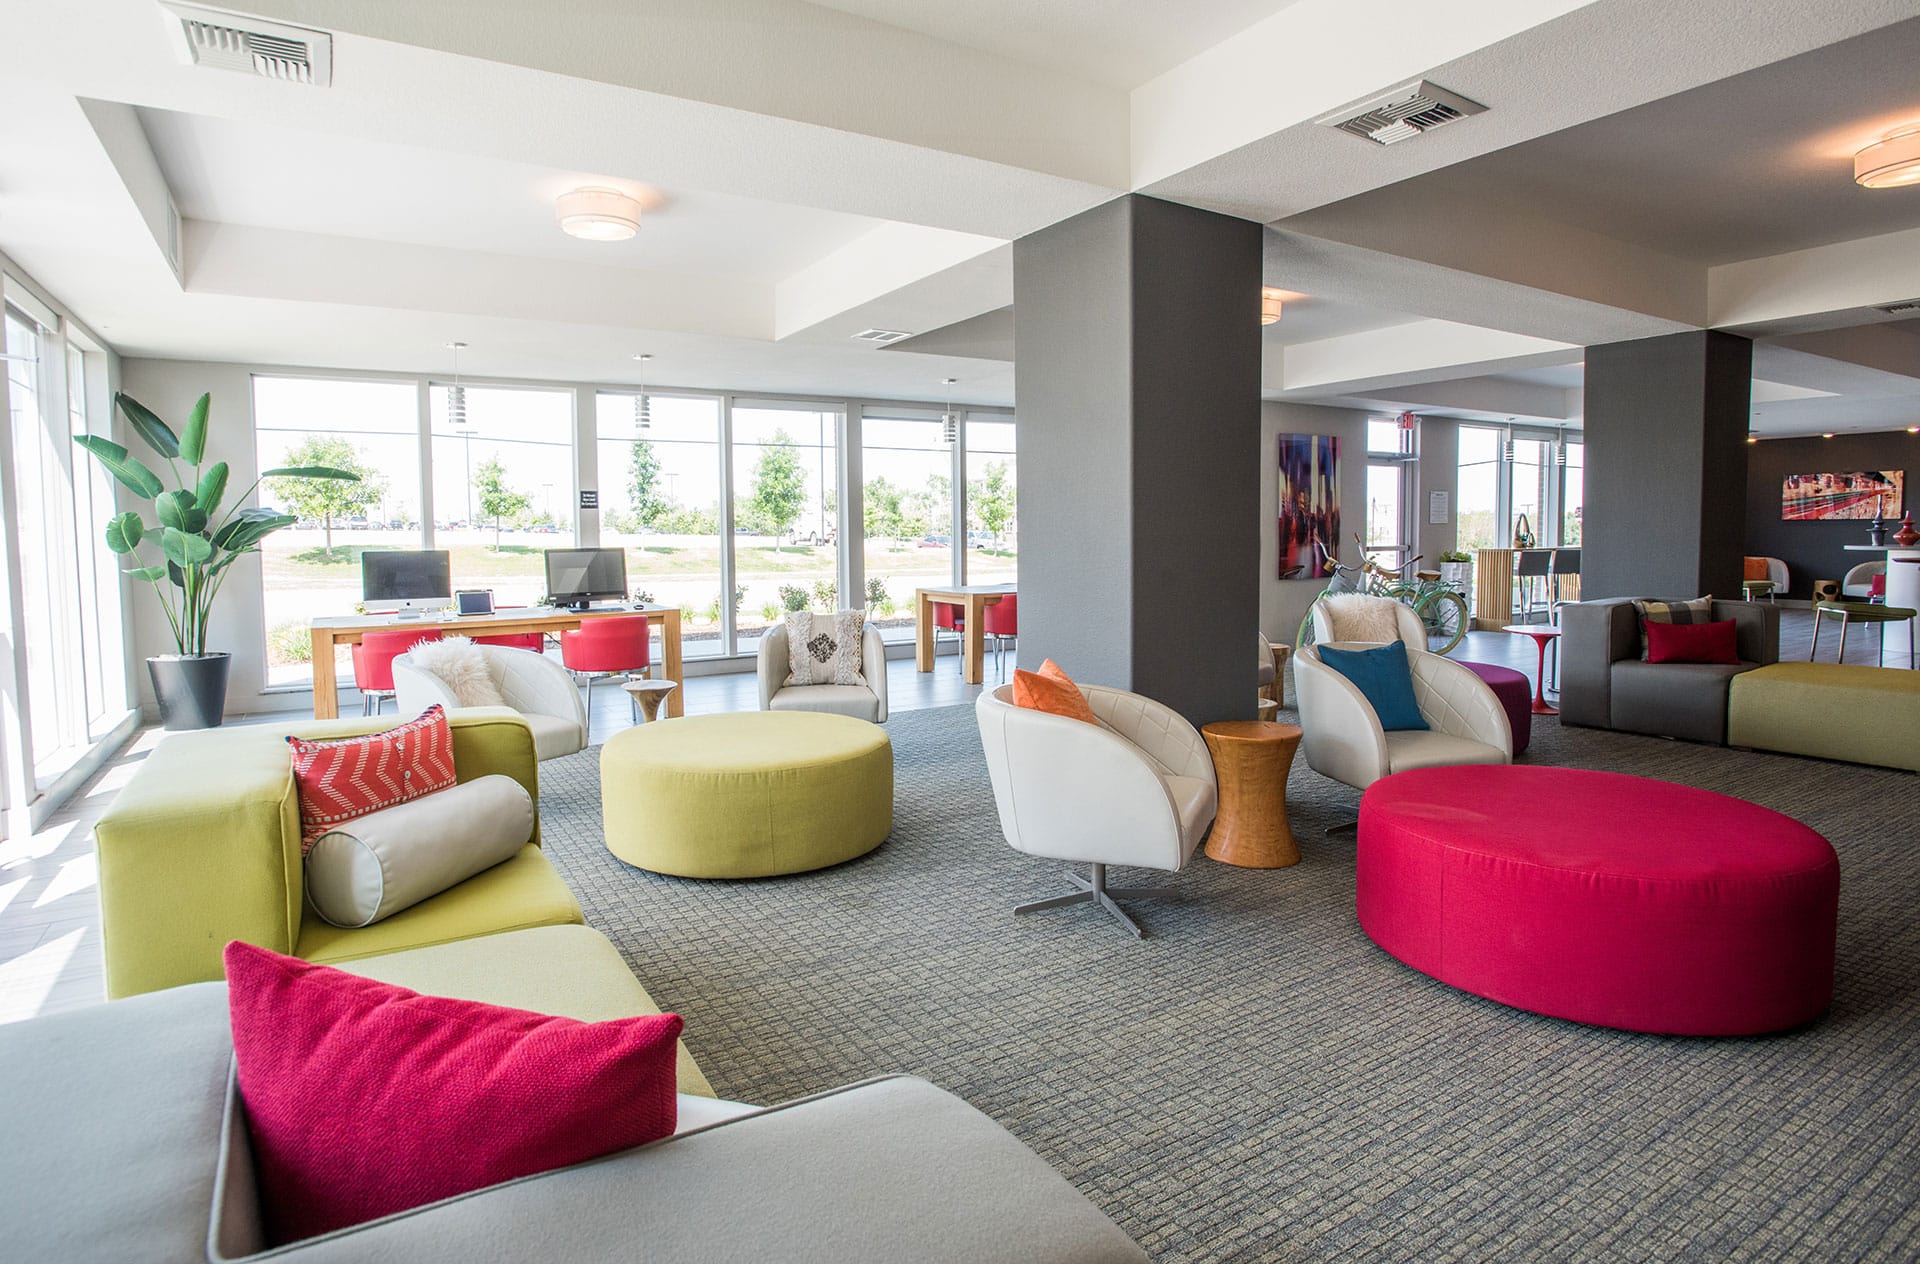 Lounge with colorful chairs and seating.